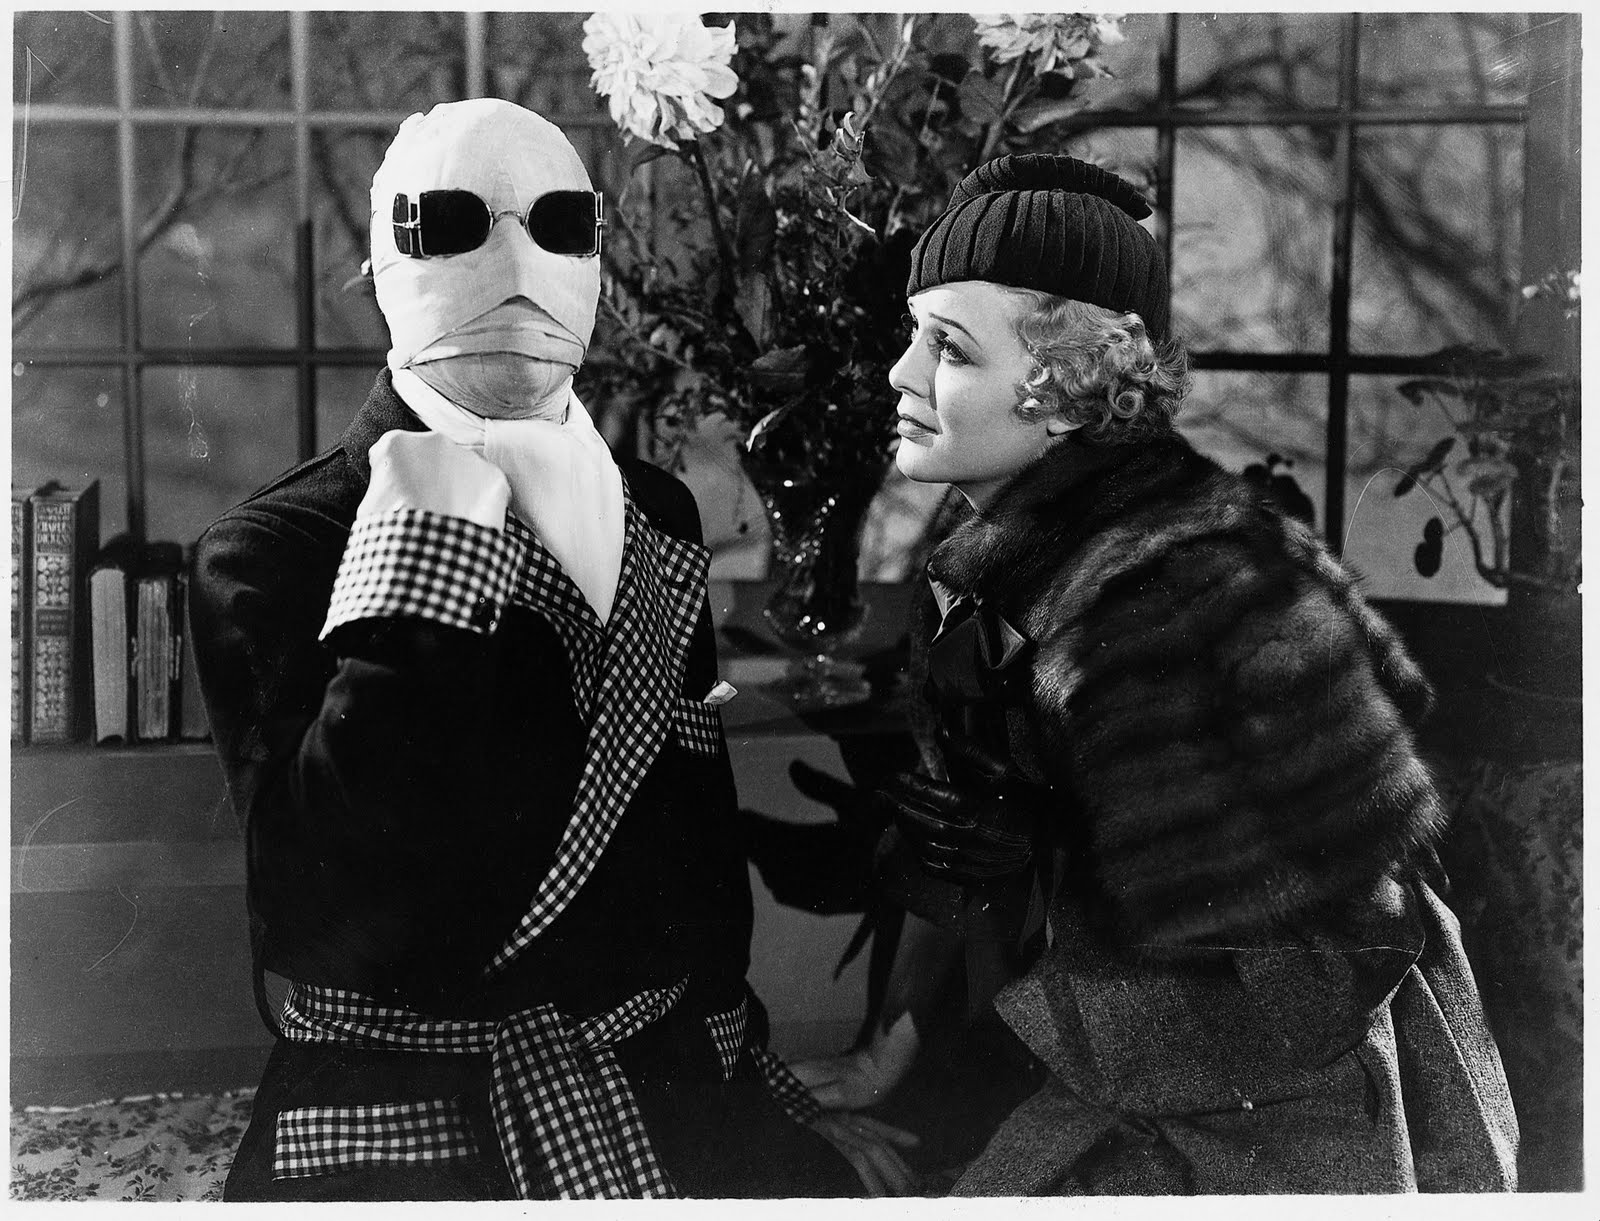 Theinvisibleman1 - Invisible Man Universal Monster - HD Wallpaper 